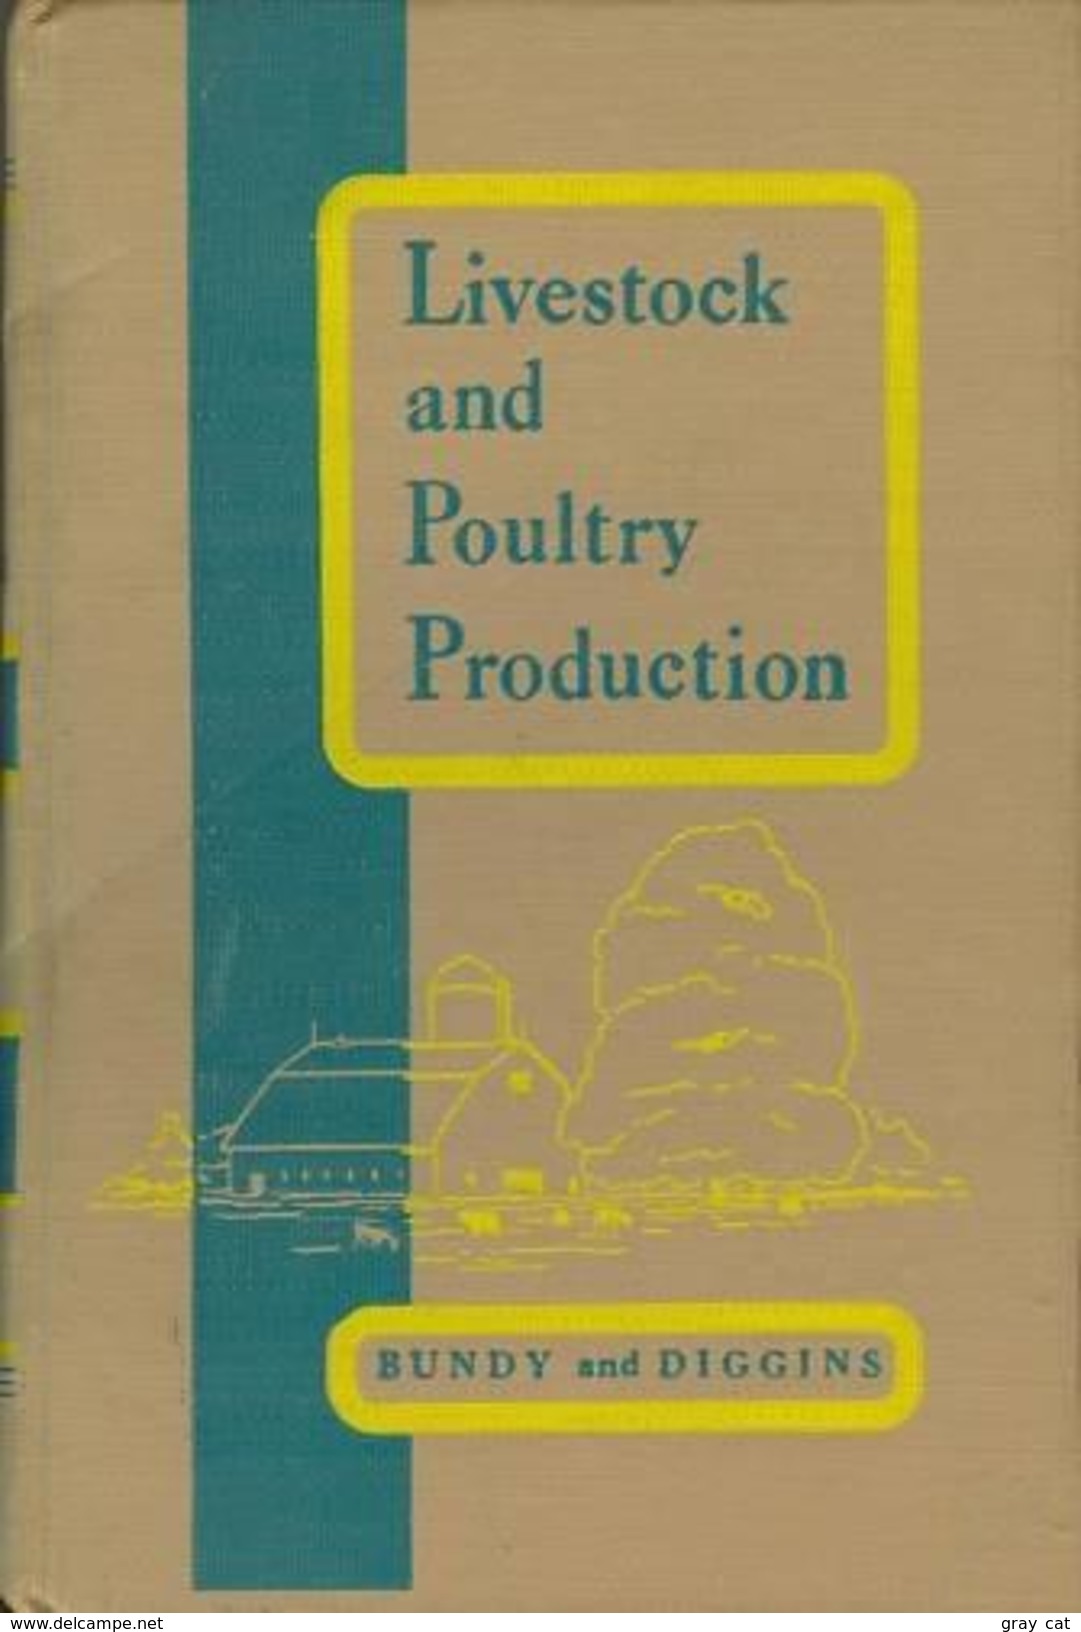 Livestock And Poultry Production: Principles And Practices By Clarence E. Bundy & Ronald V. Diggins - 1950-Now